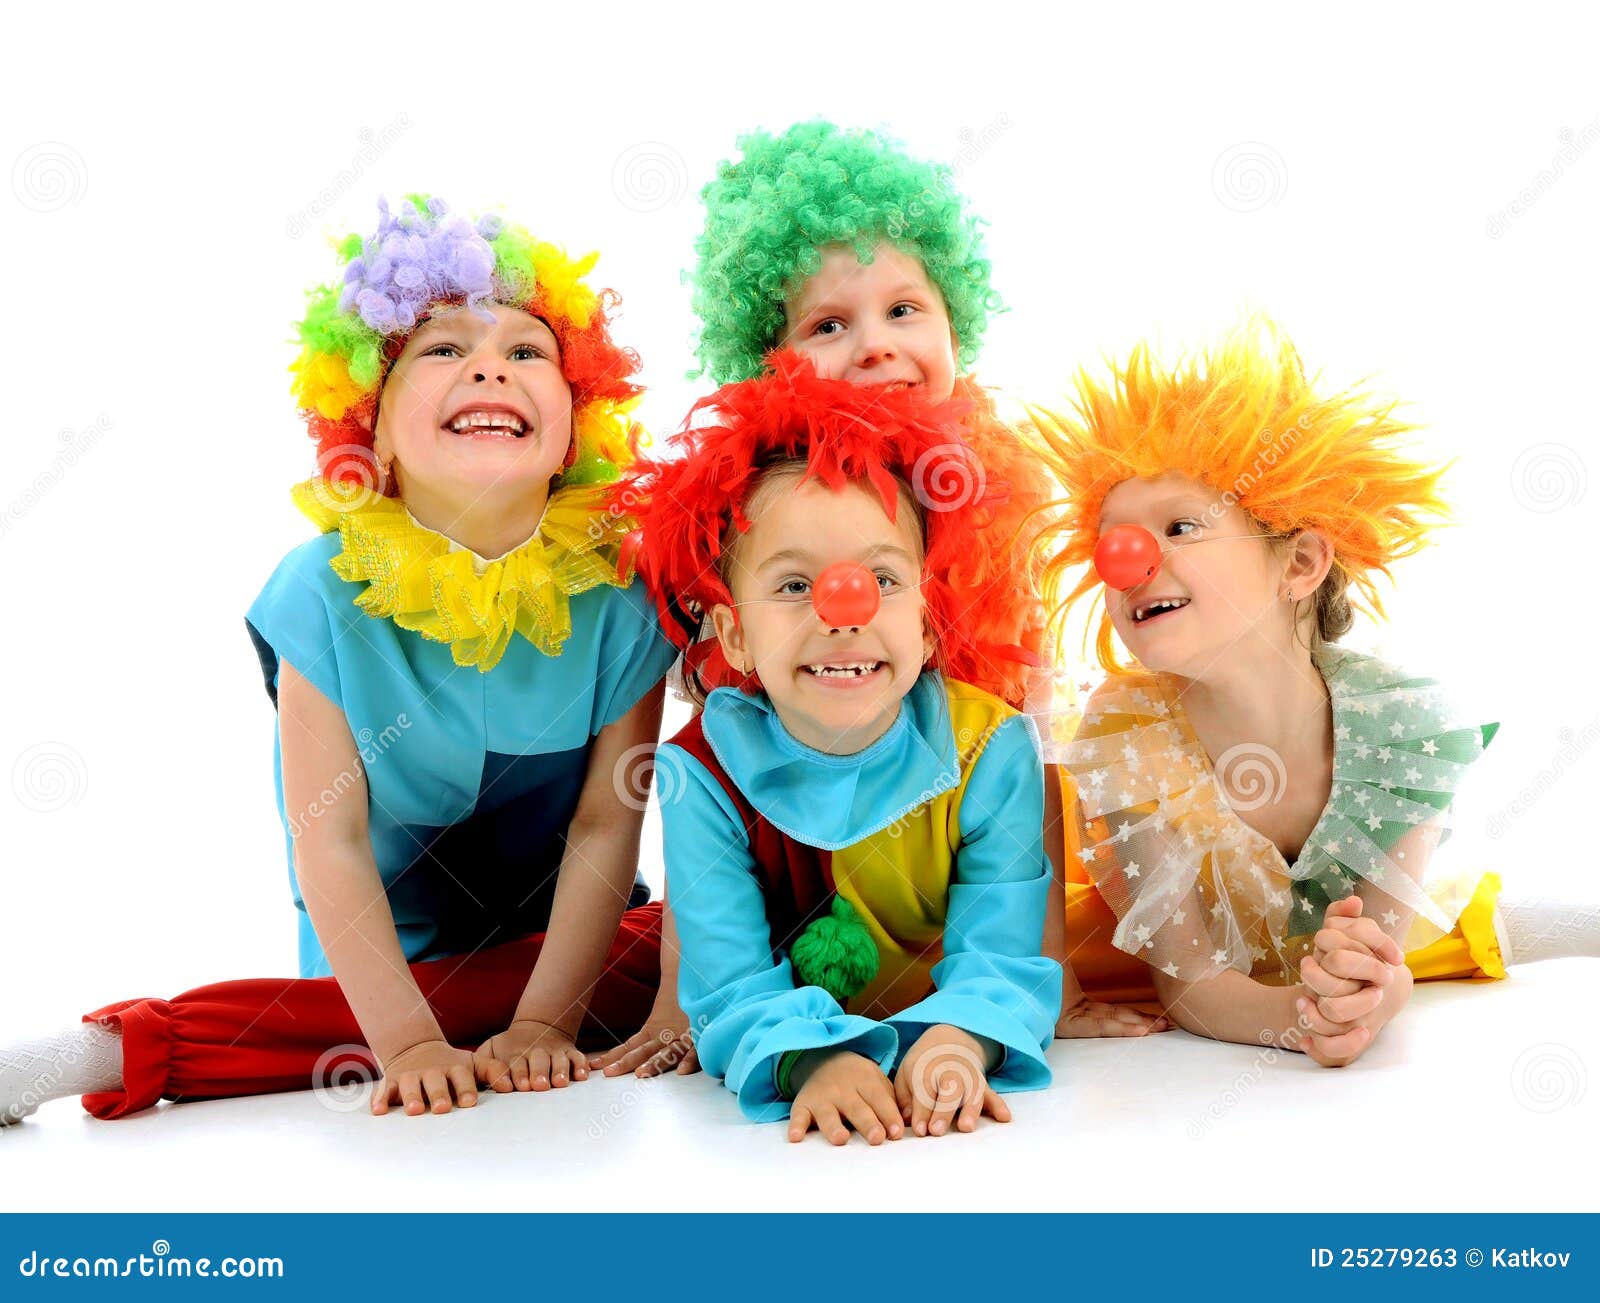 Funny clowns stock image. Image of cheerful, joke, color - 25279263